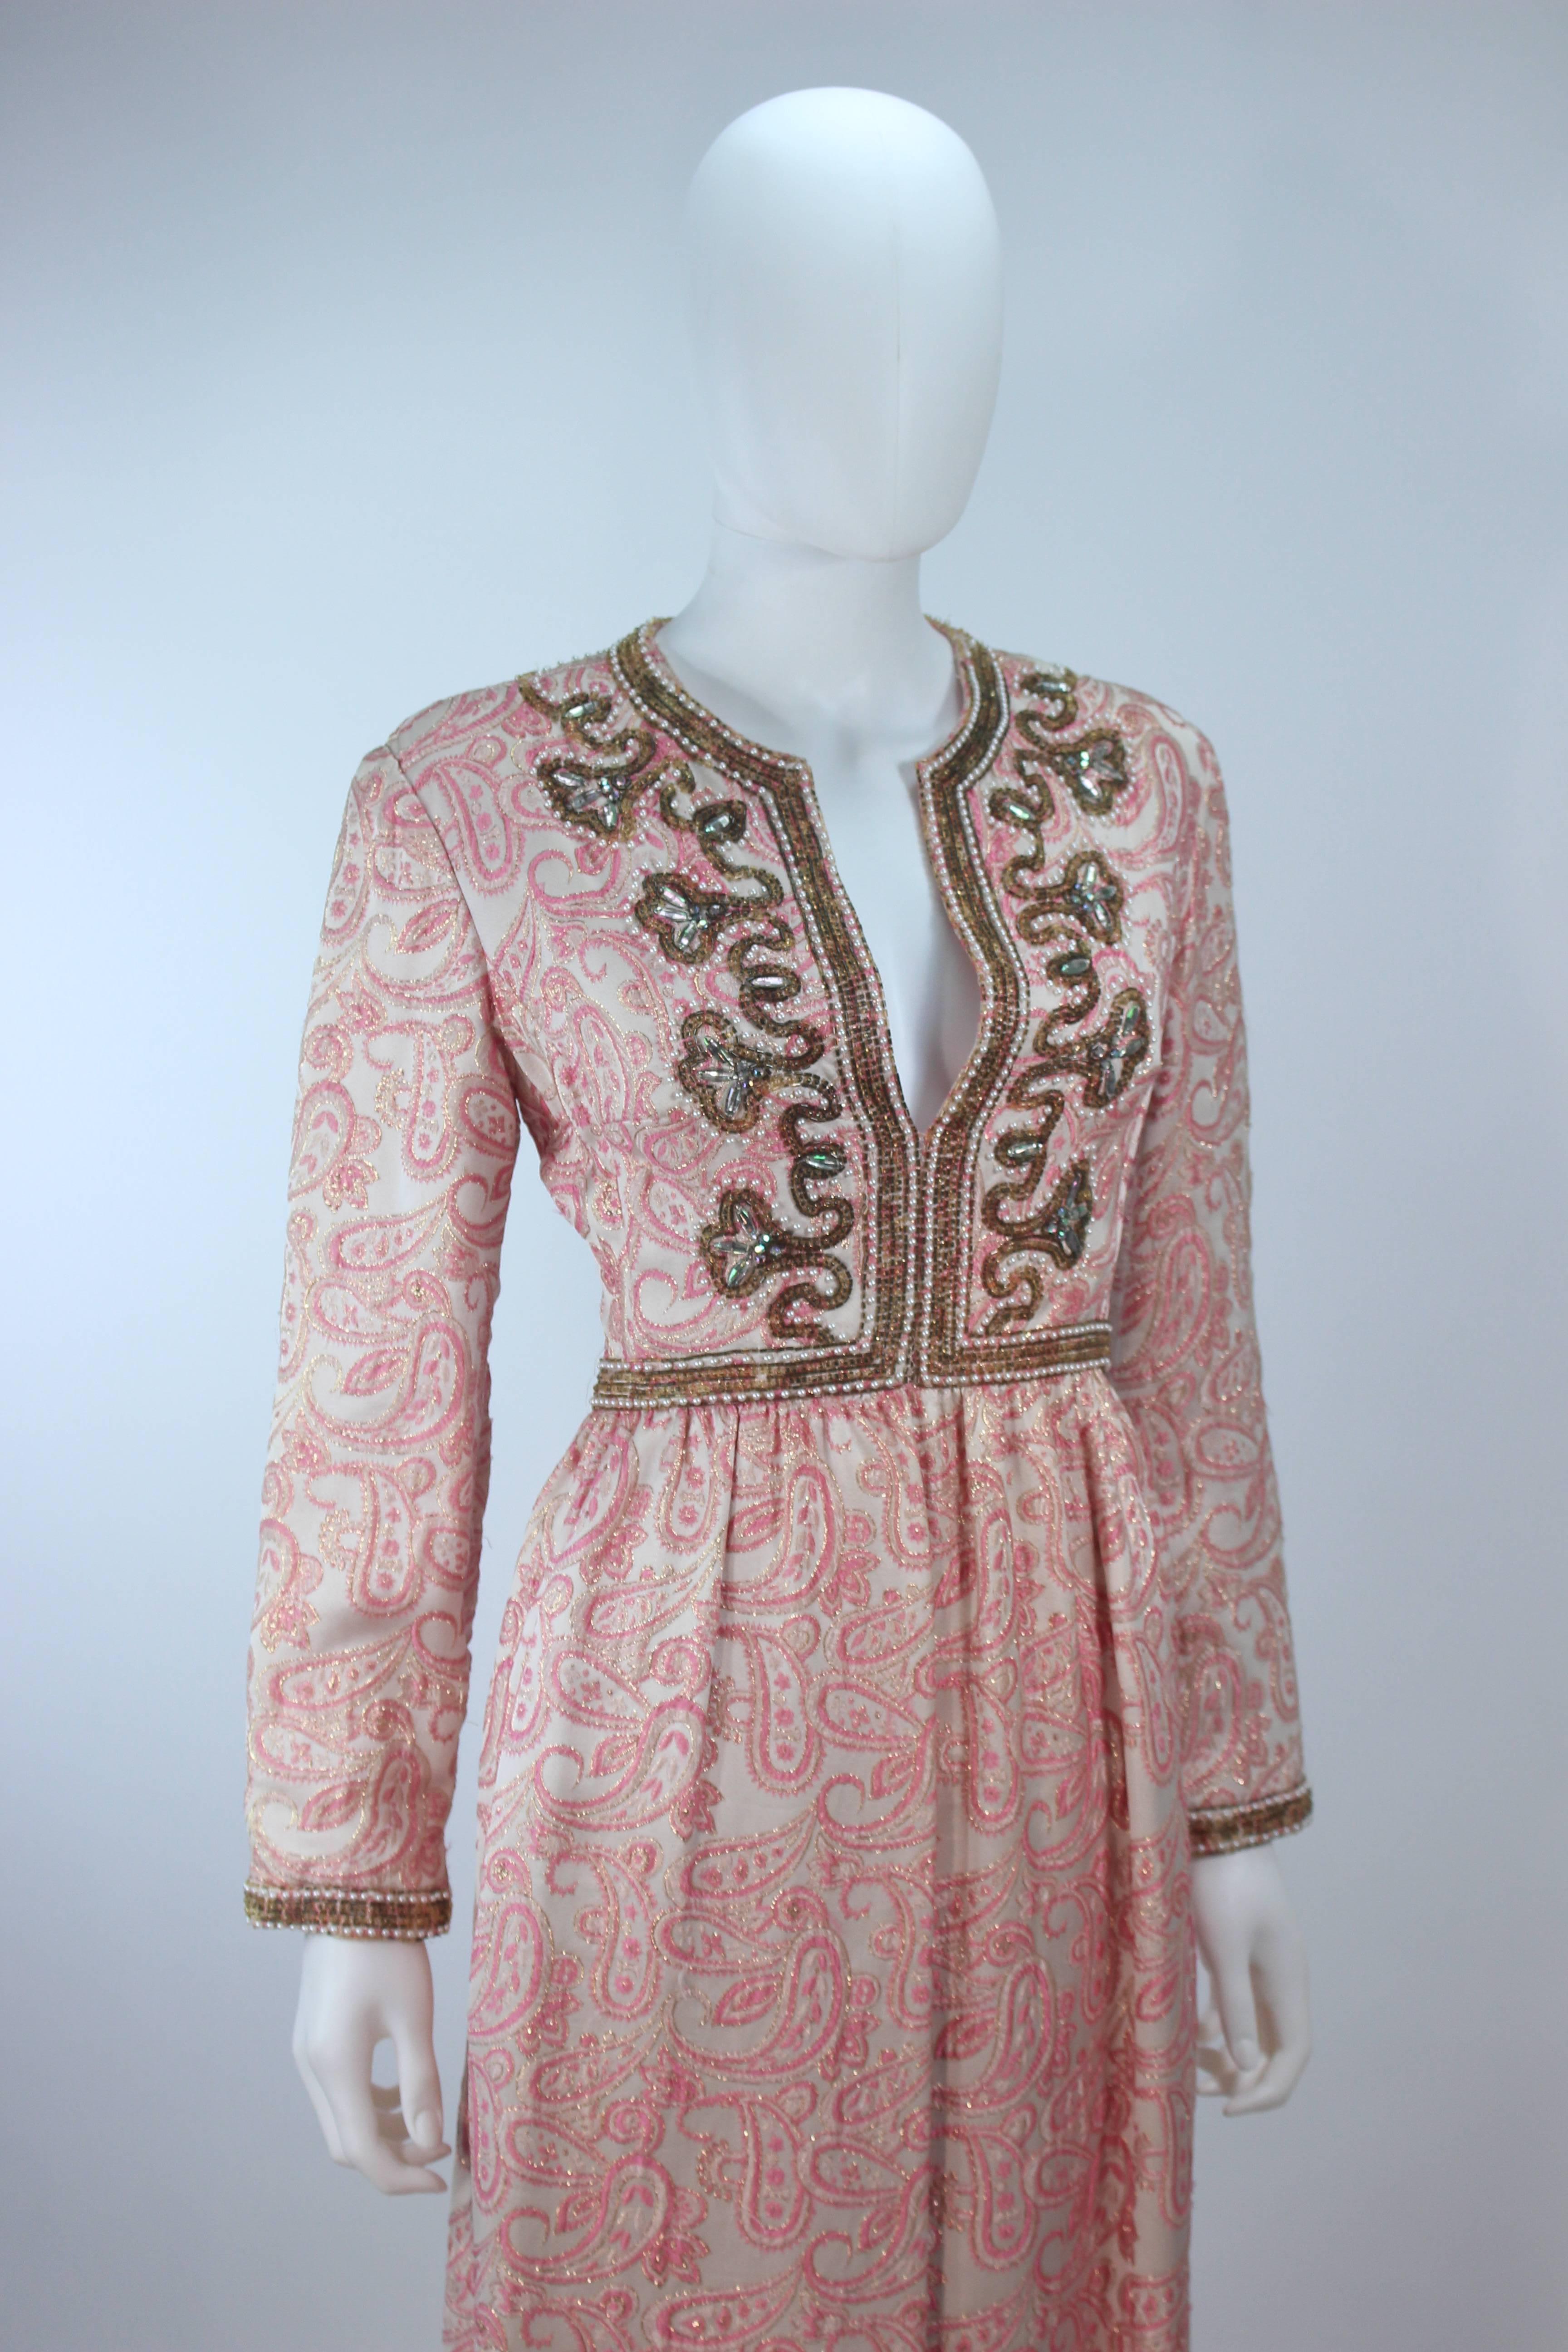 Women's CEIL CHAPMAN 1960's Pink Paisley Brocade Gown with Beaded Applique Size 6 8